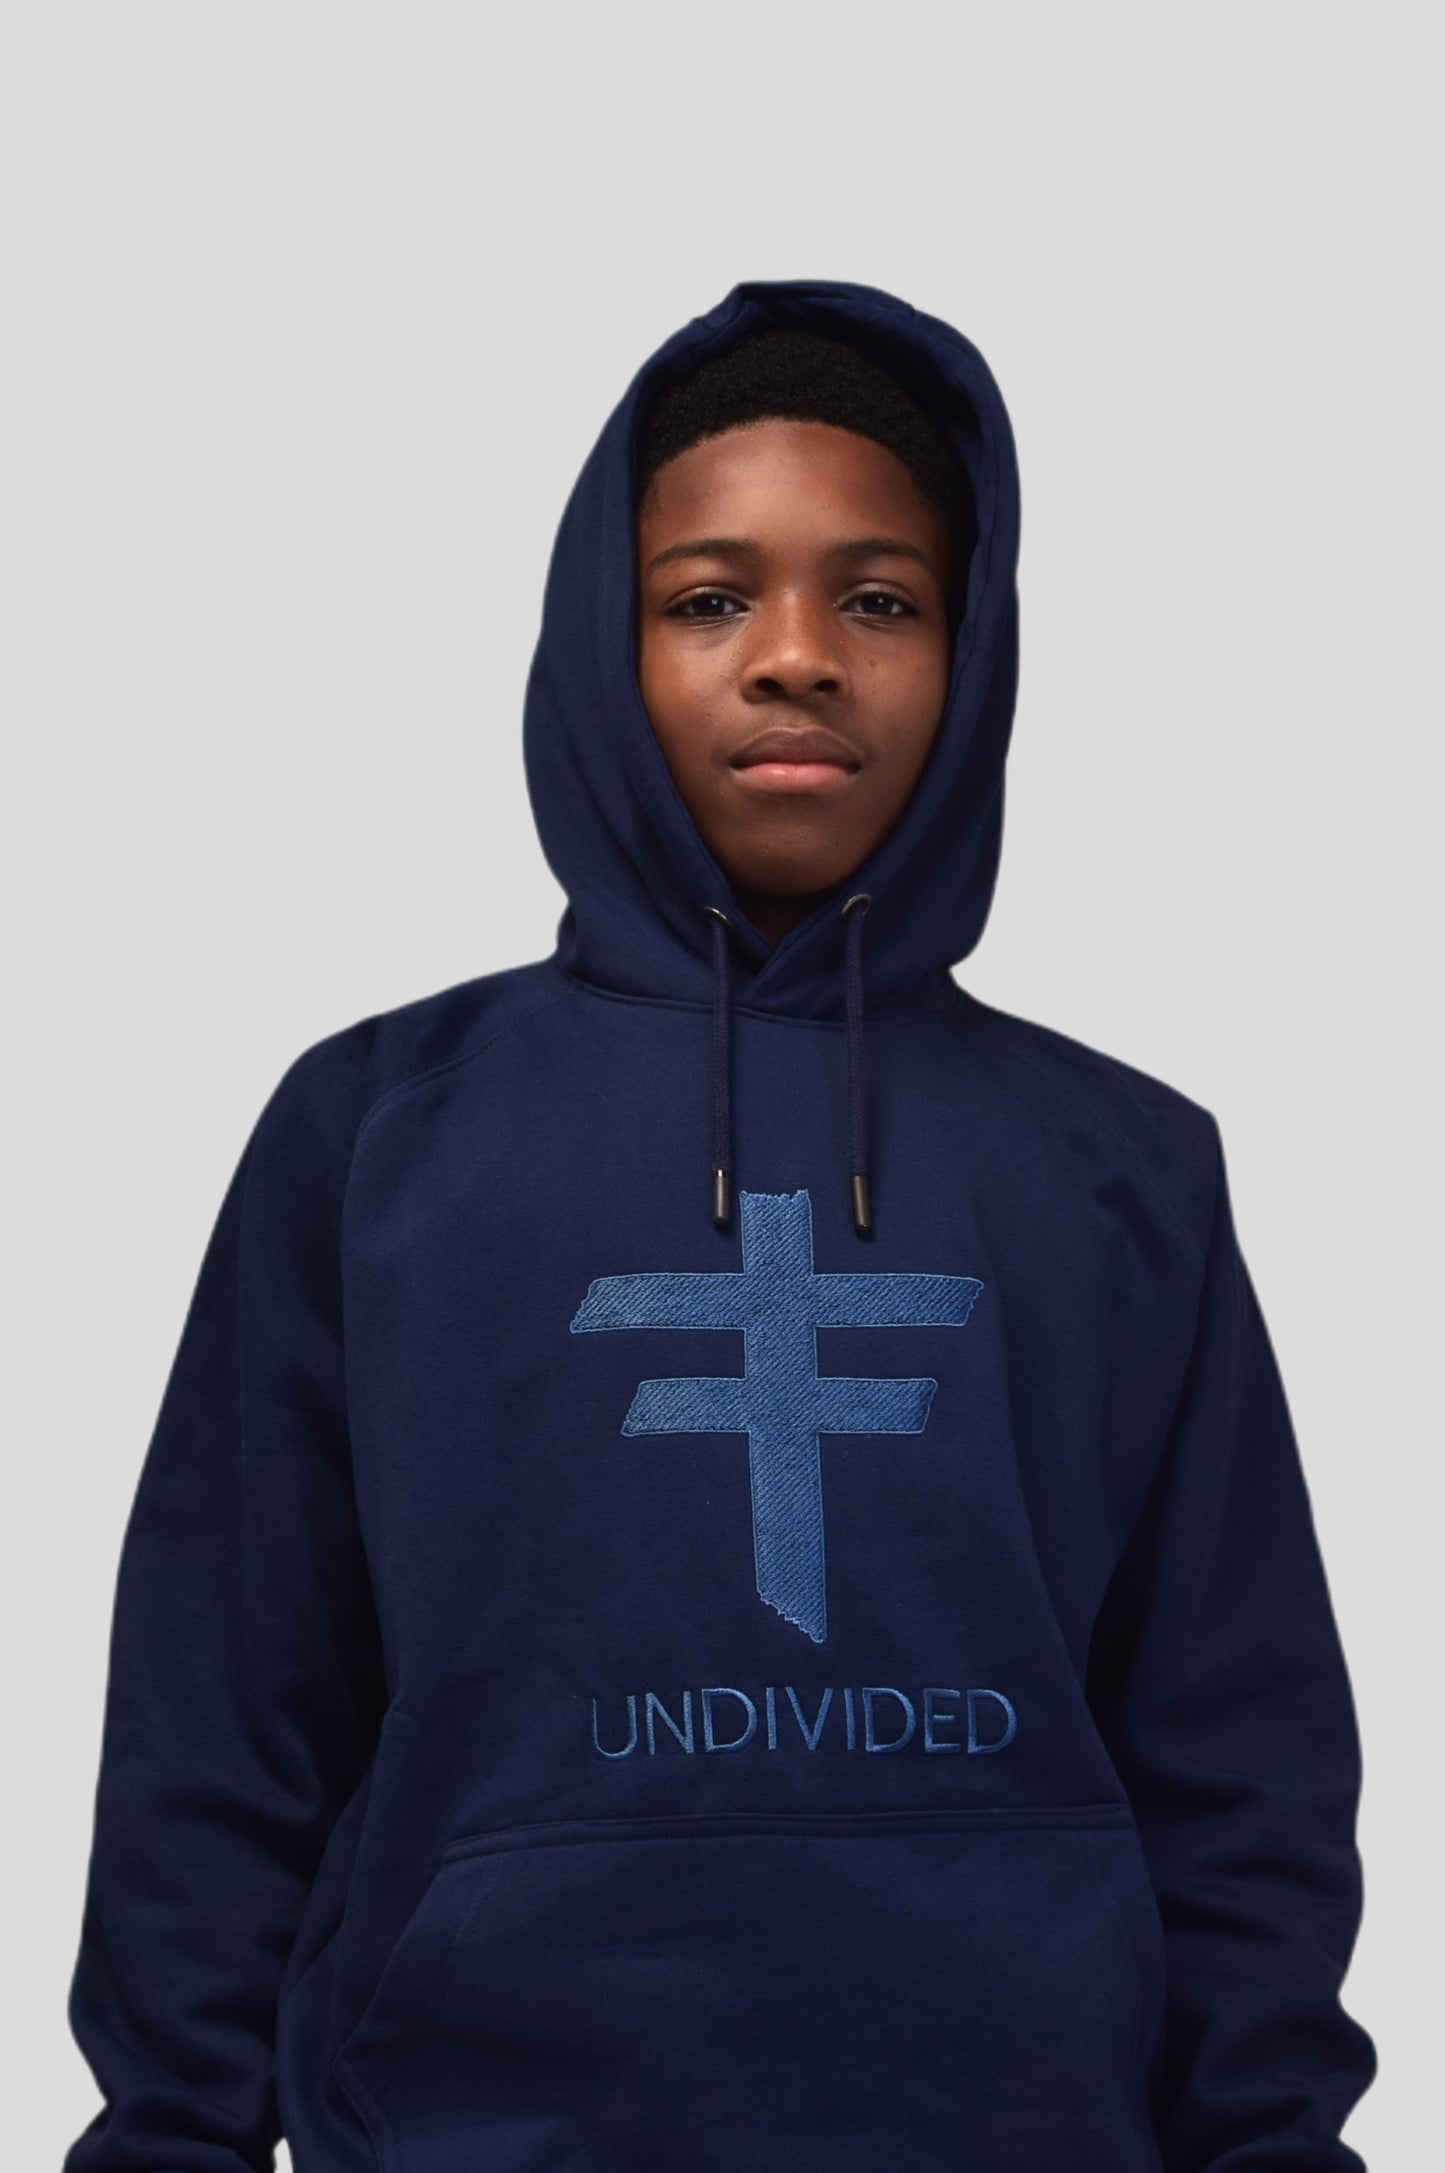 Undivided Youth Royal Blue Tracksuit W/ Blue Embroidery